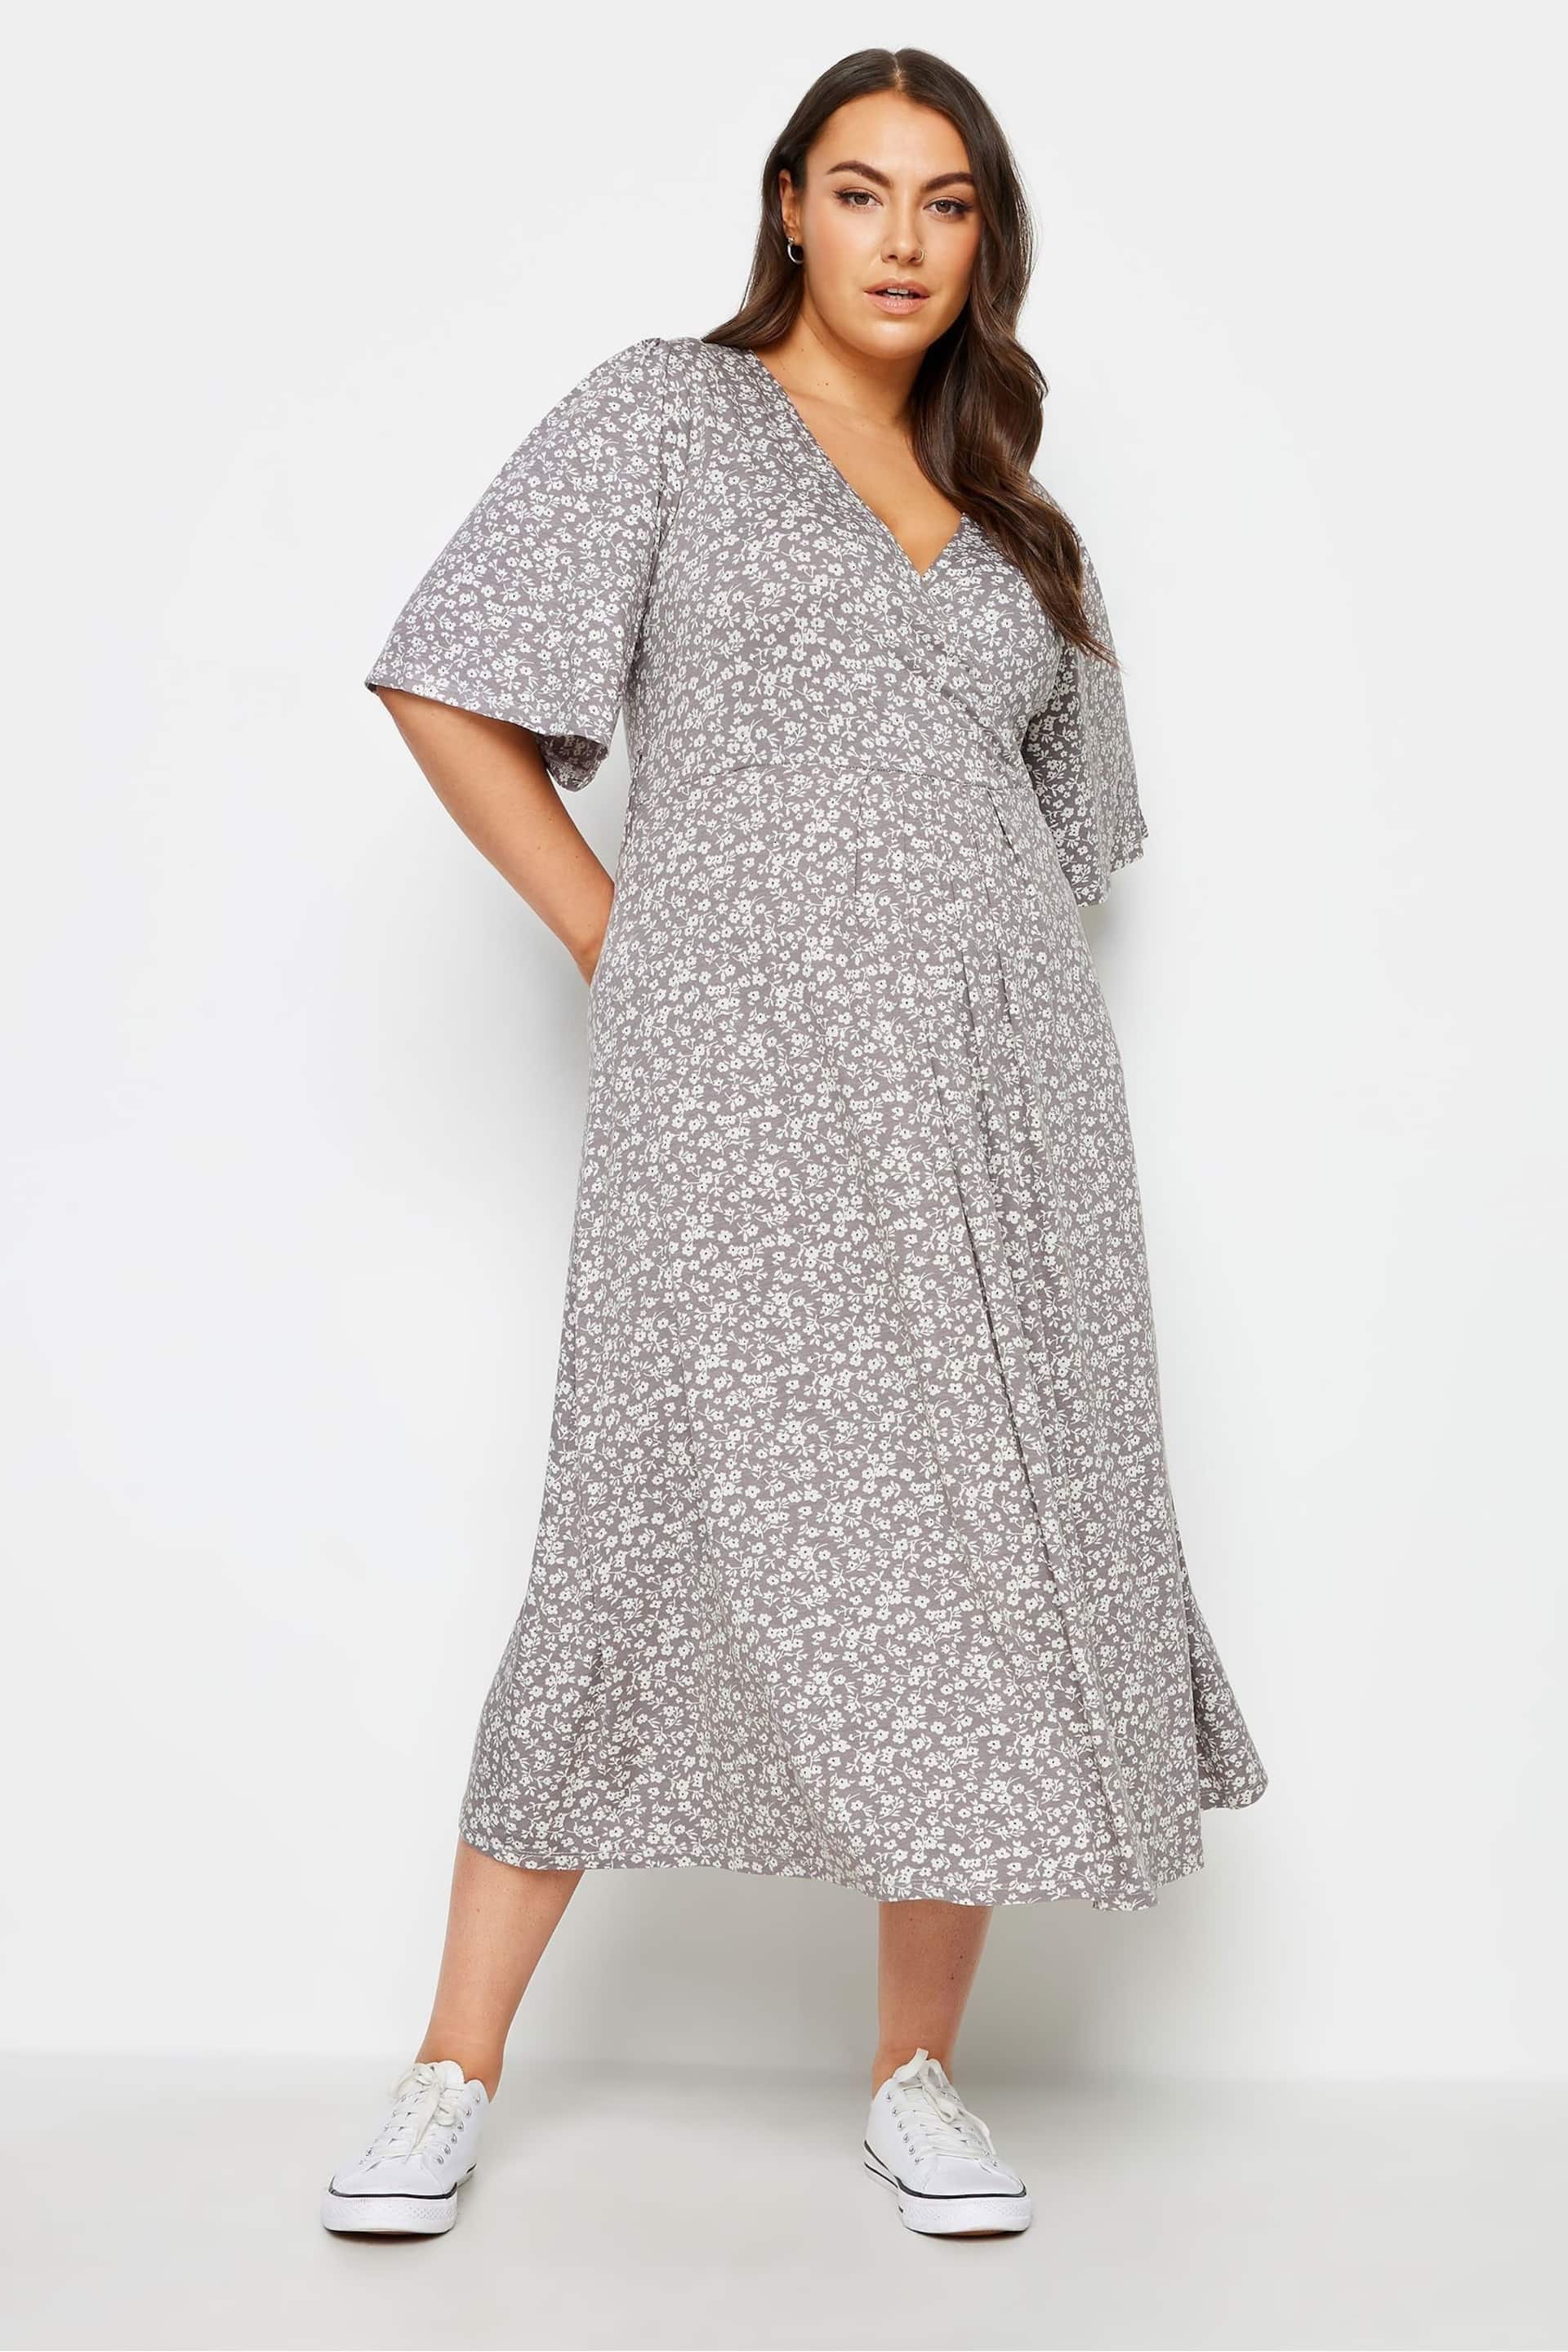 Yours Curve Grey Floral Maxi Wrap Dress - Image 3 of 4